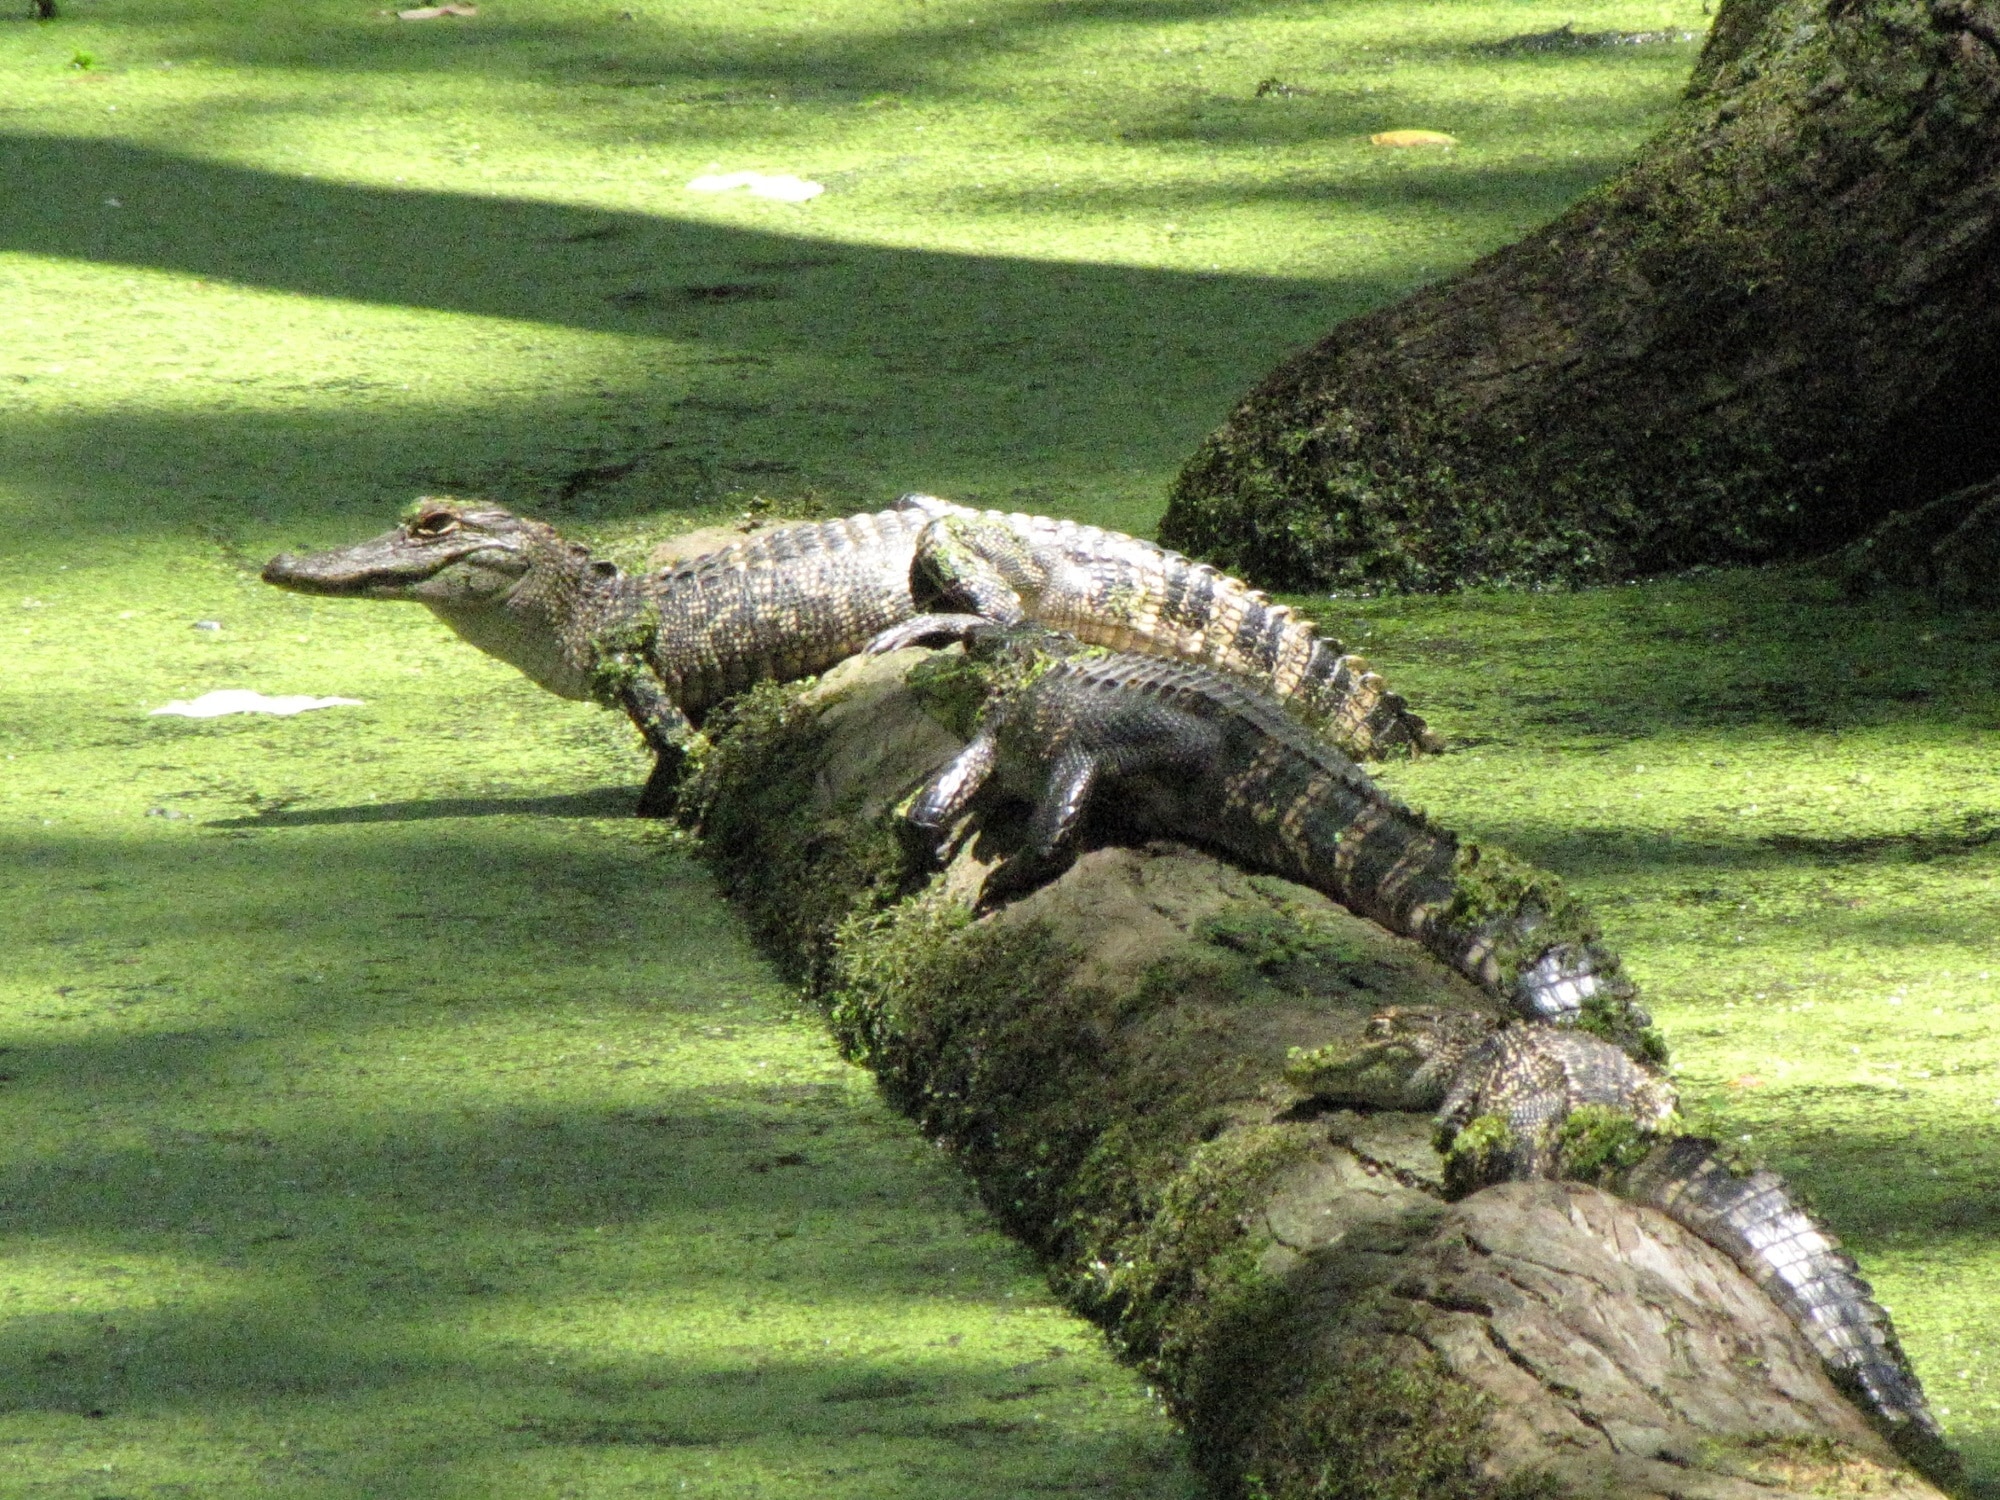 two alligators on log at the swamp during day